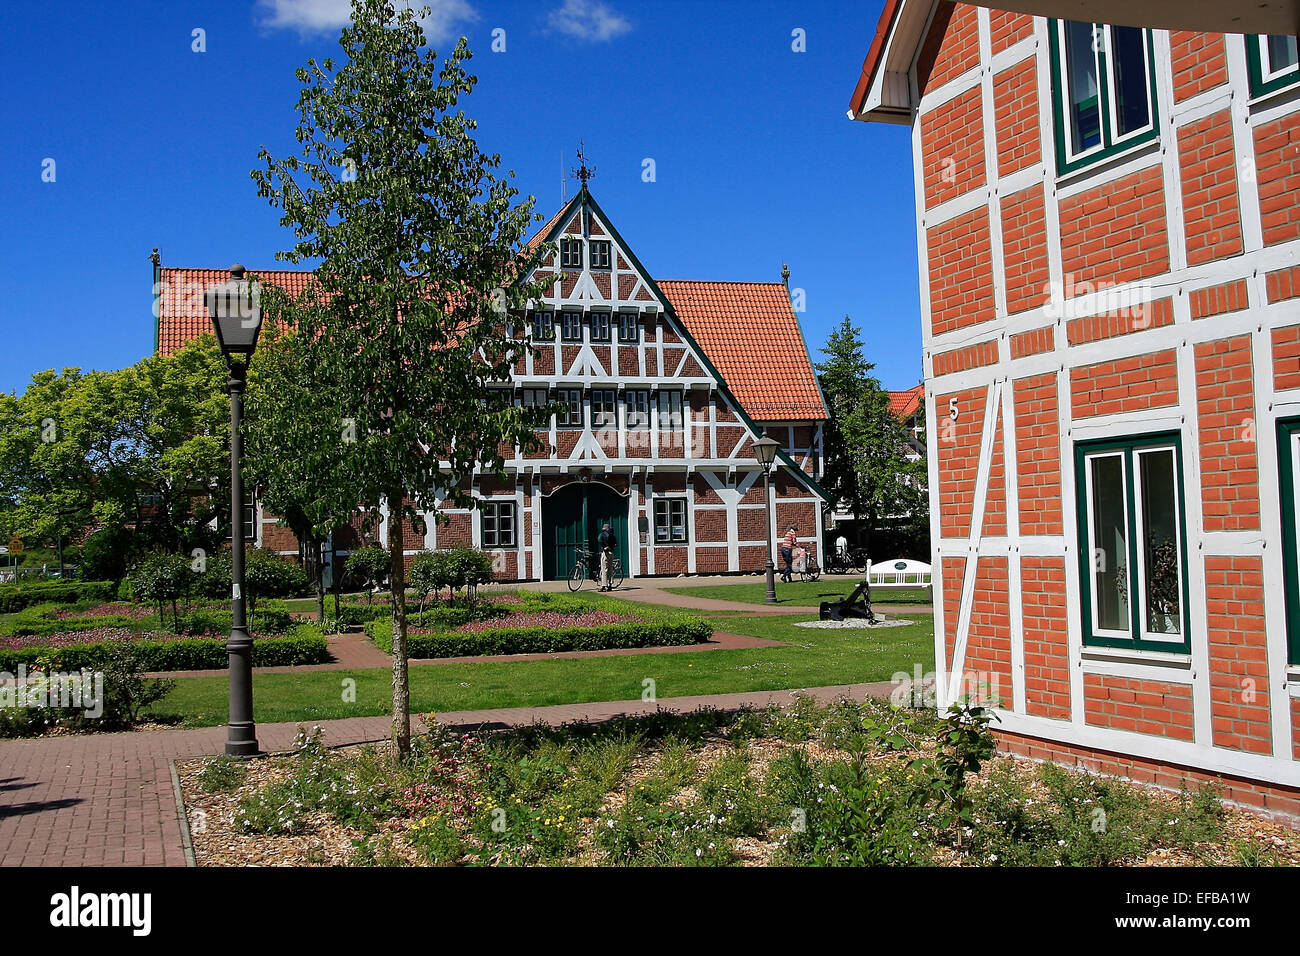 The Town hall of York (Jork). The Town Hall is the former Gräfenhof and a historic half-timbered house in the city of York. York is a town in Lower Saxony and the center of the Altes Land. Photo: Klaus Nowottnick Date: May 23, 2009 Stock Photo